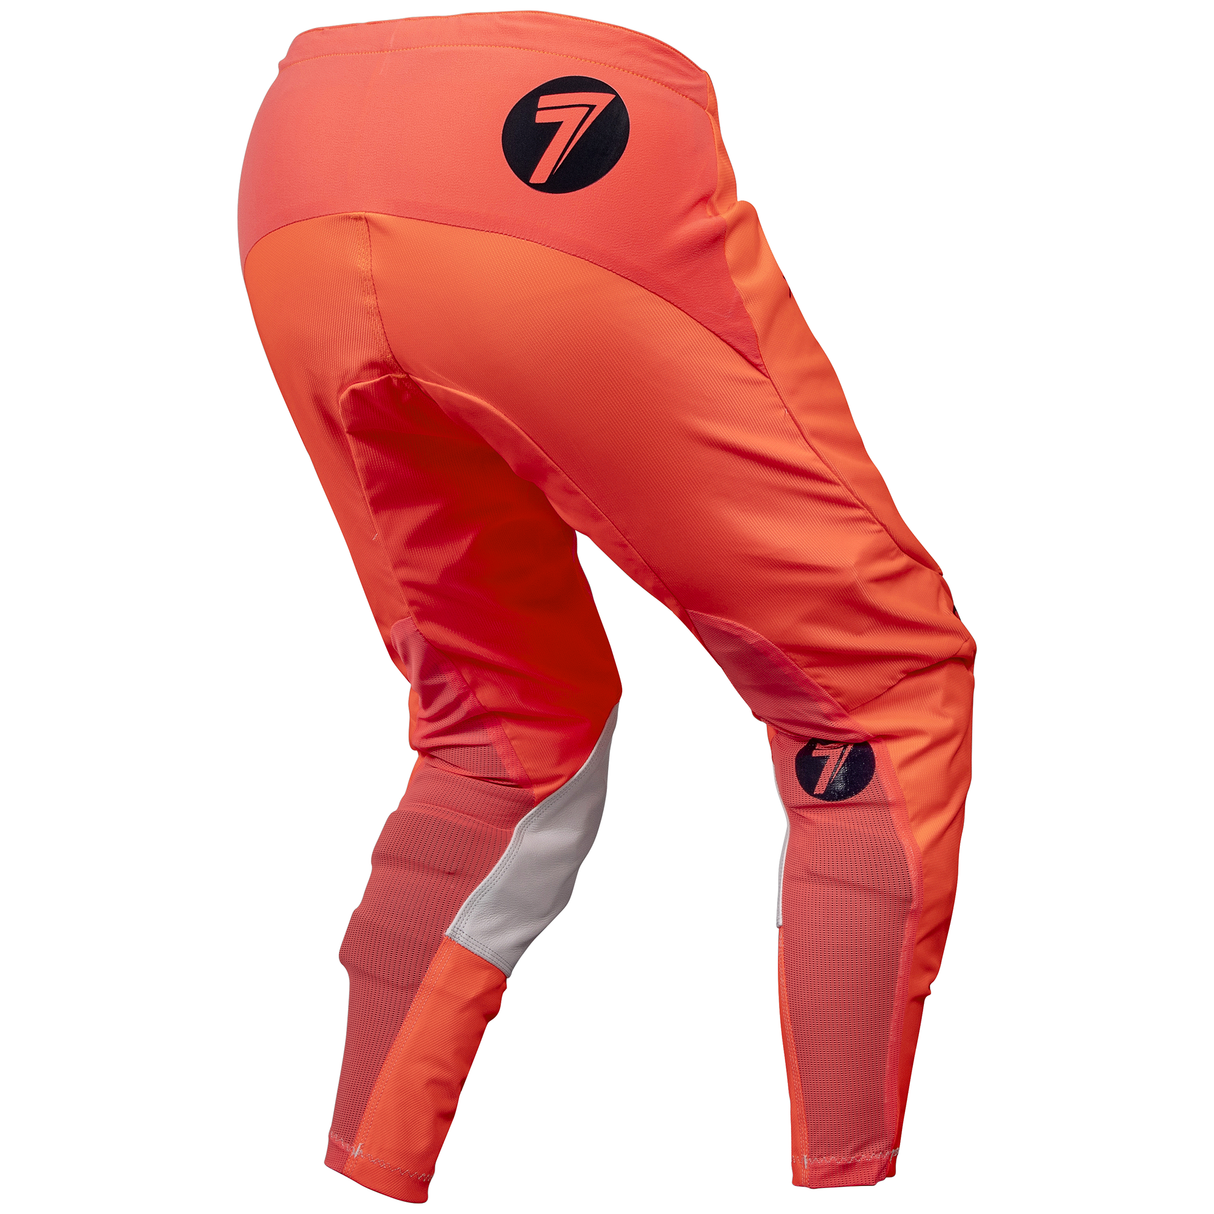 Seven MX 19.1 Annex Adult Exo Pant (Coral/Navy)